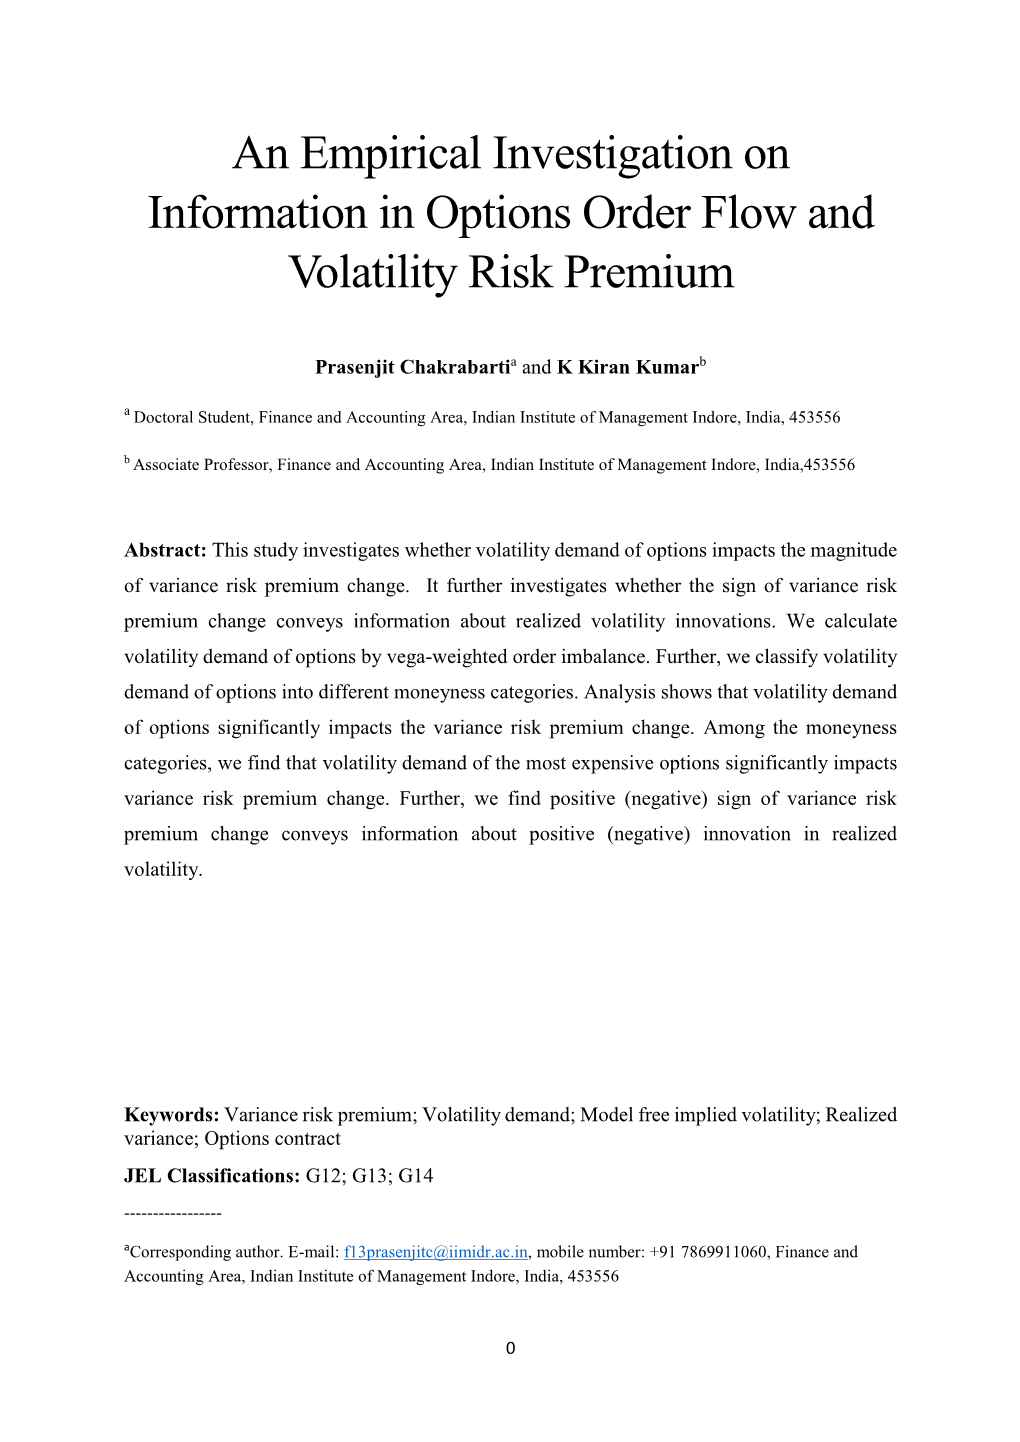 An Empirical Investigation on Information in Options Order Flow and Volatility Risk Premium